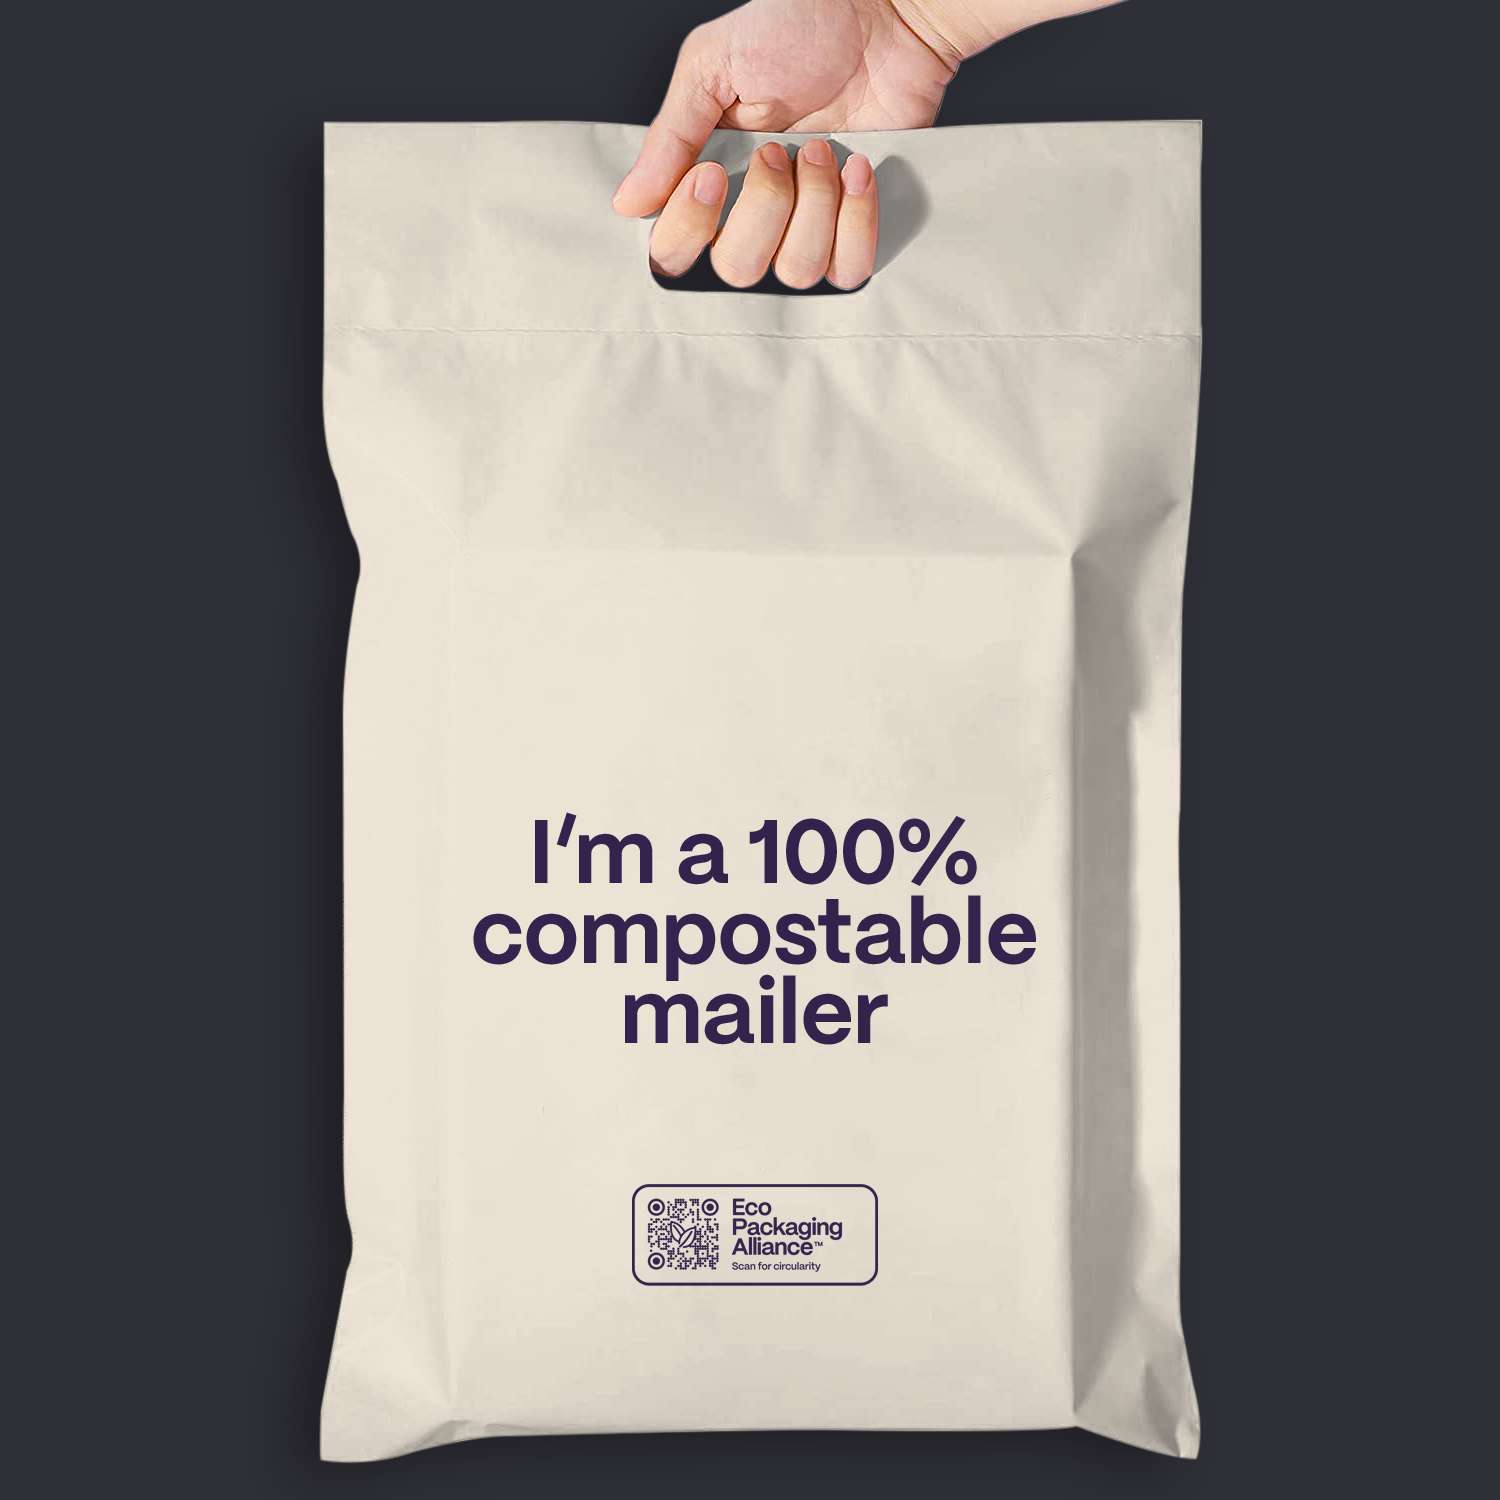 CompostableMailerswithHandles1